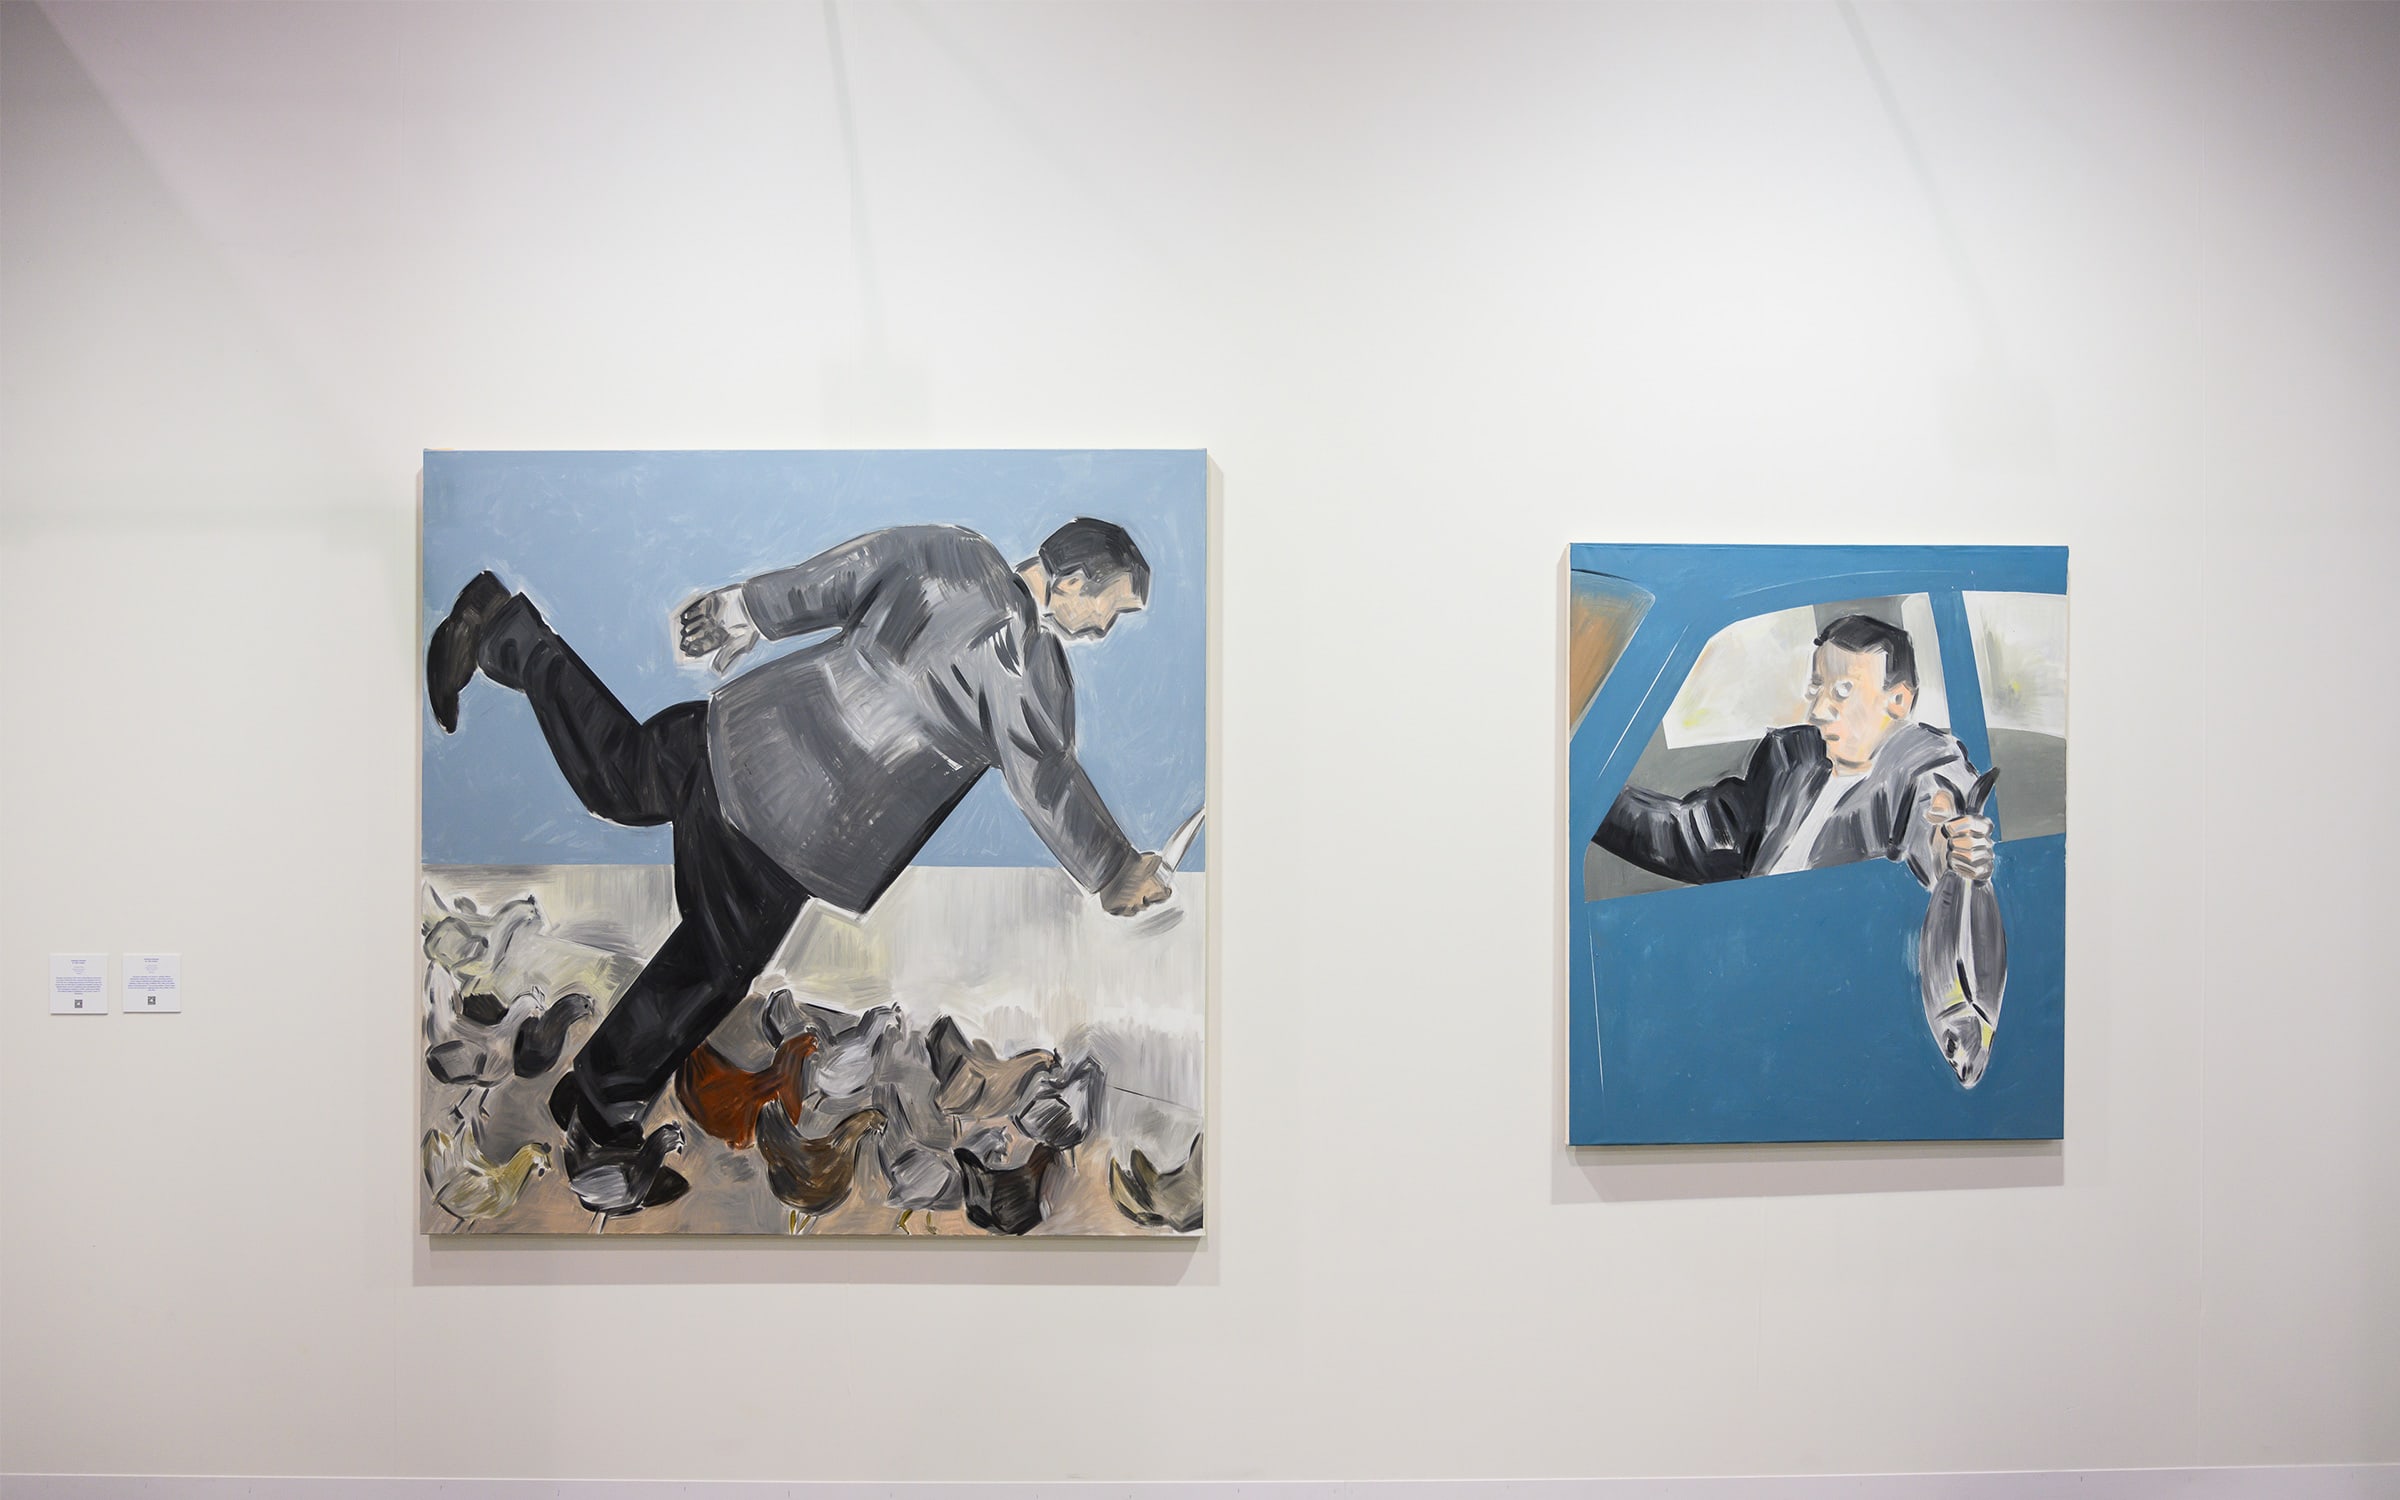 Two works by Apostolos Georgiou, on view at gb agency.